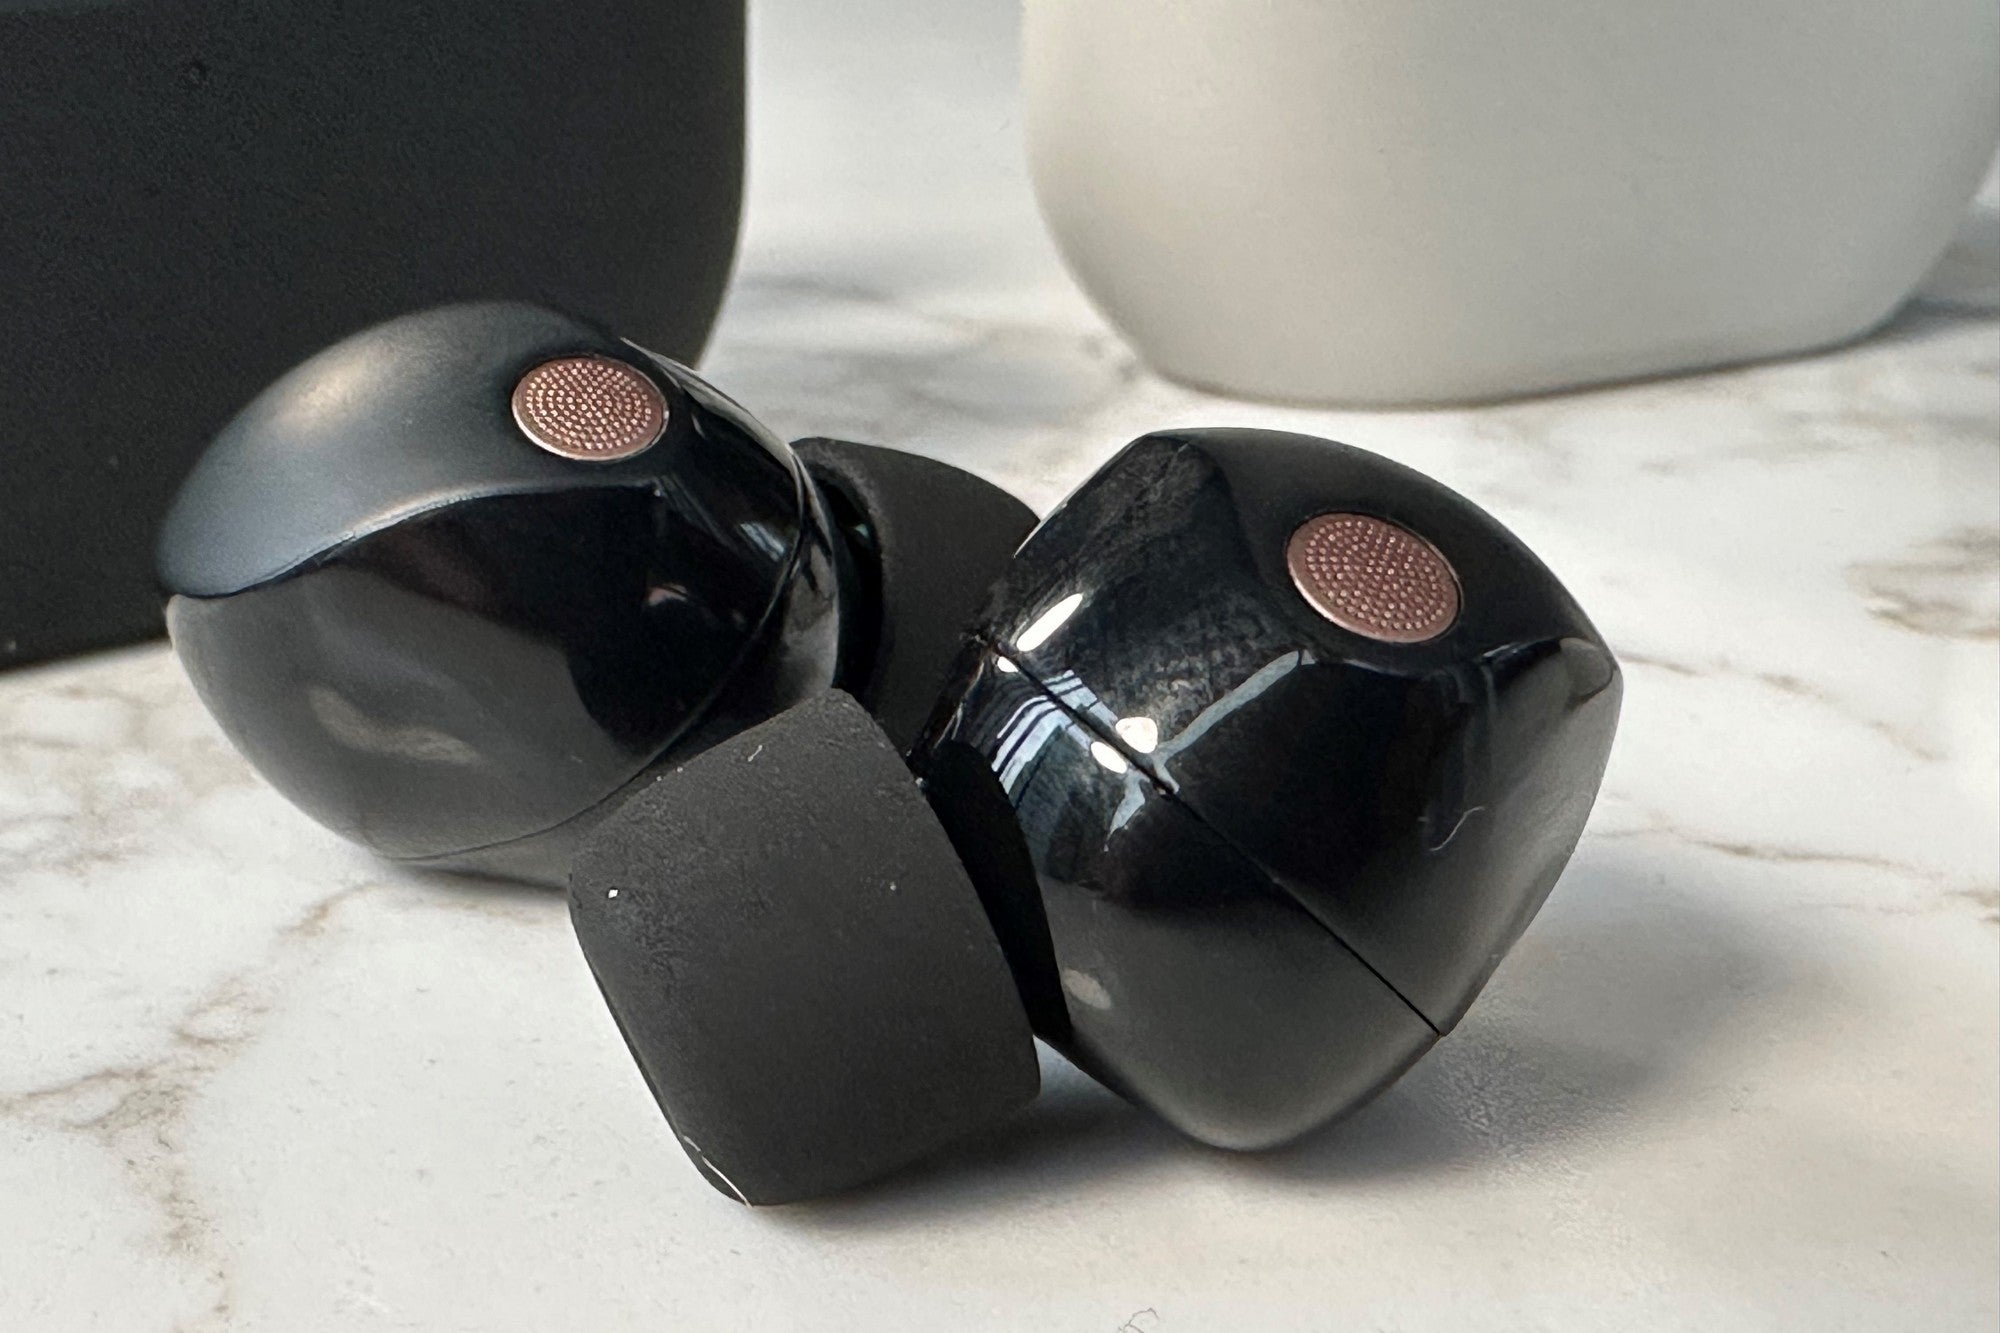 Sony WF-1000XM5 review: Are These Earbuds Worth the Hype?